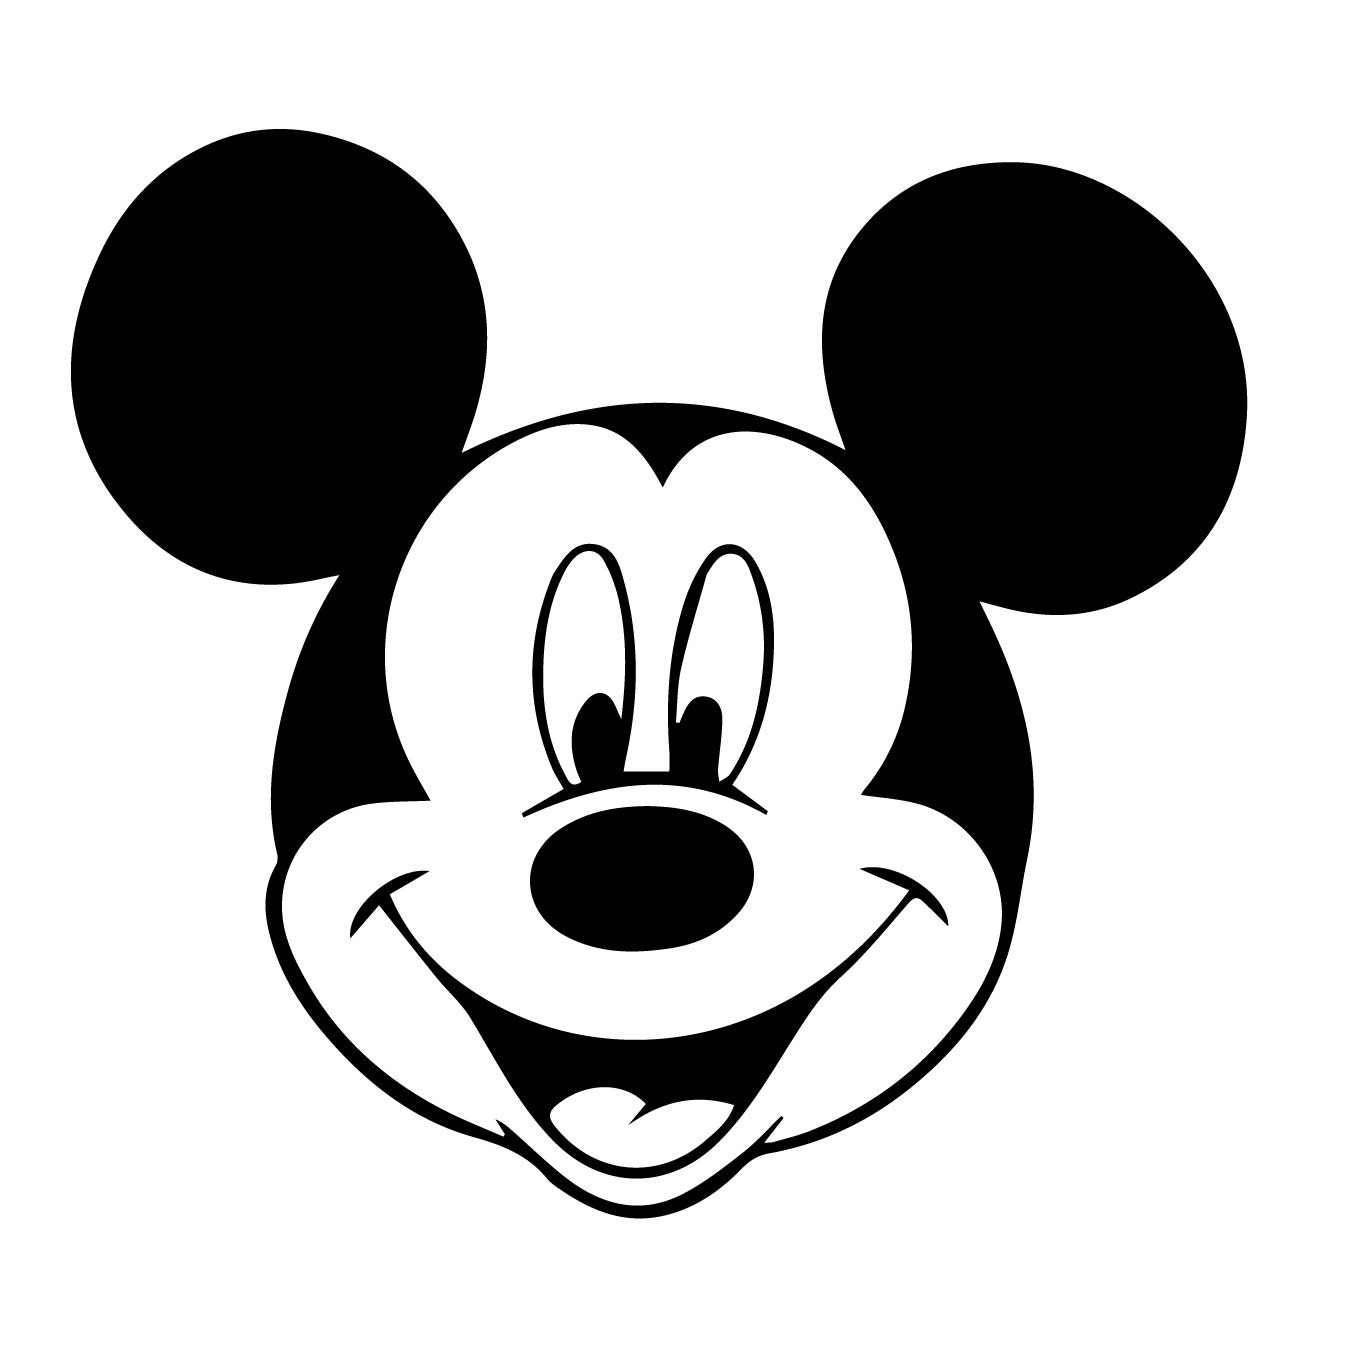 Download Mickey mouse svgWalt disney eps Mickey mouse